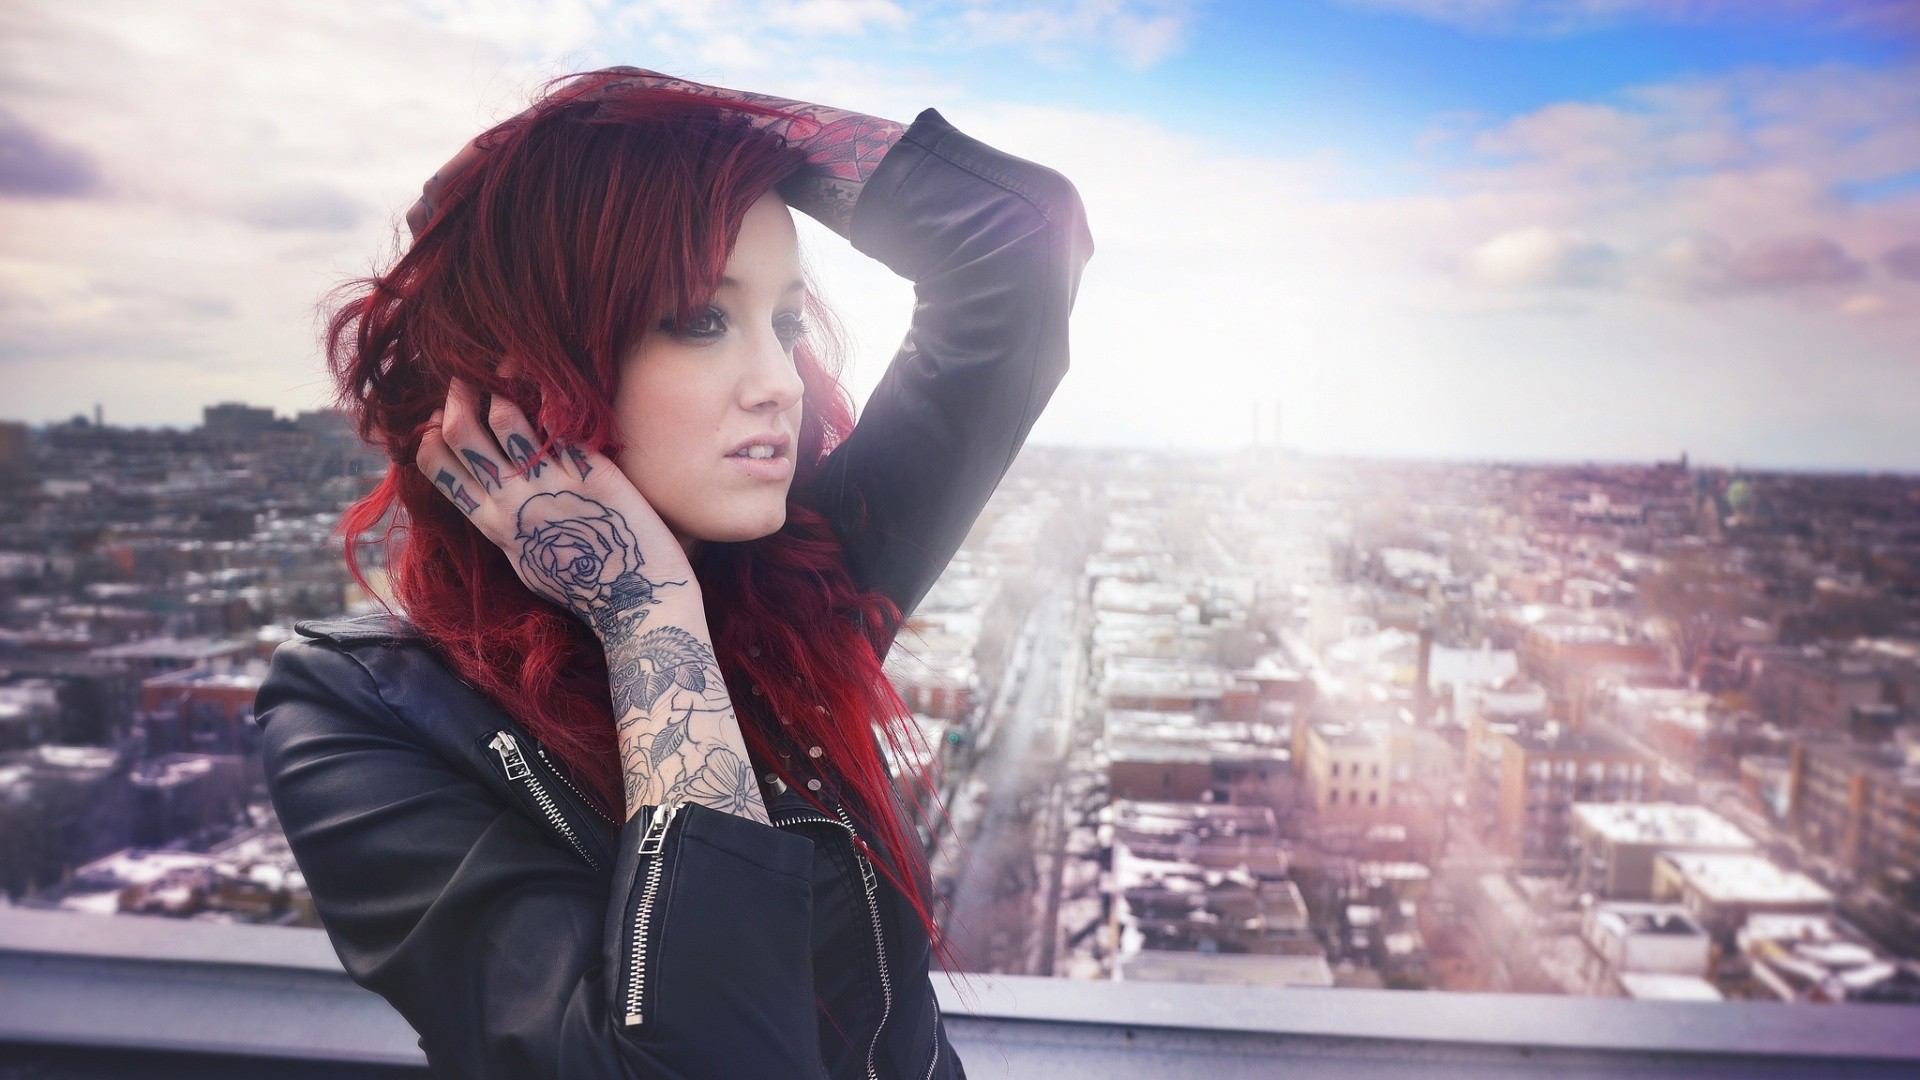 People 1920x1080 tattoo women women outdoors depth of field inked girls long hair leather jacket hands in hair urban cityscape looking into the distance dyed hair redhead arms up